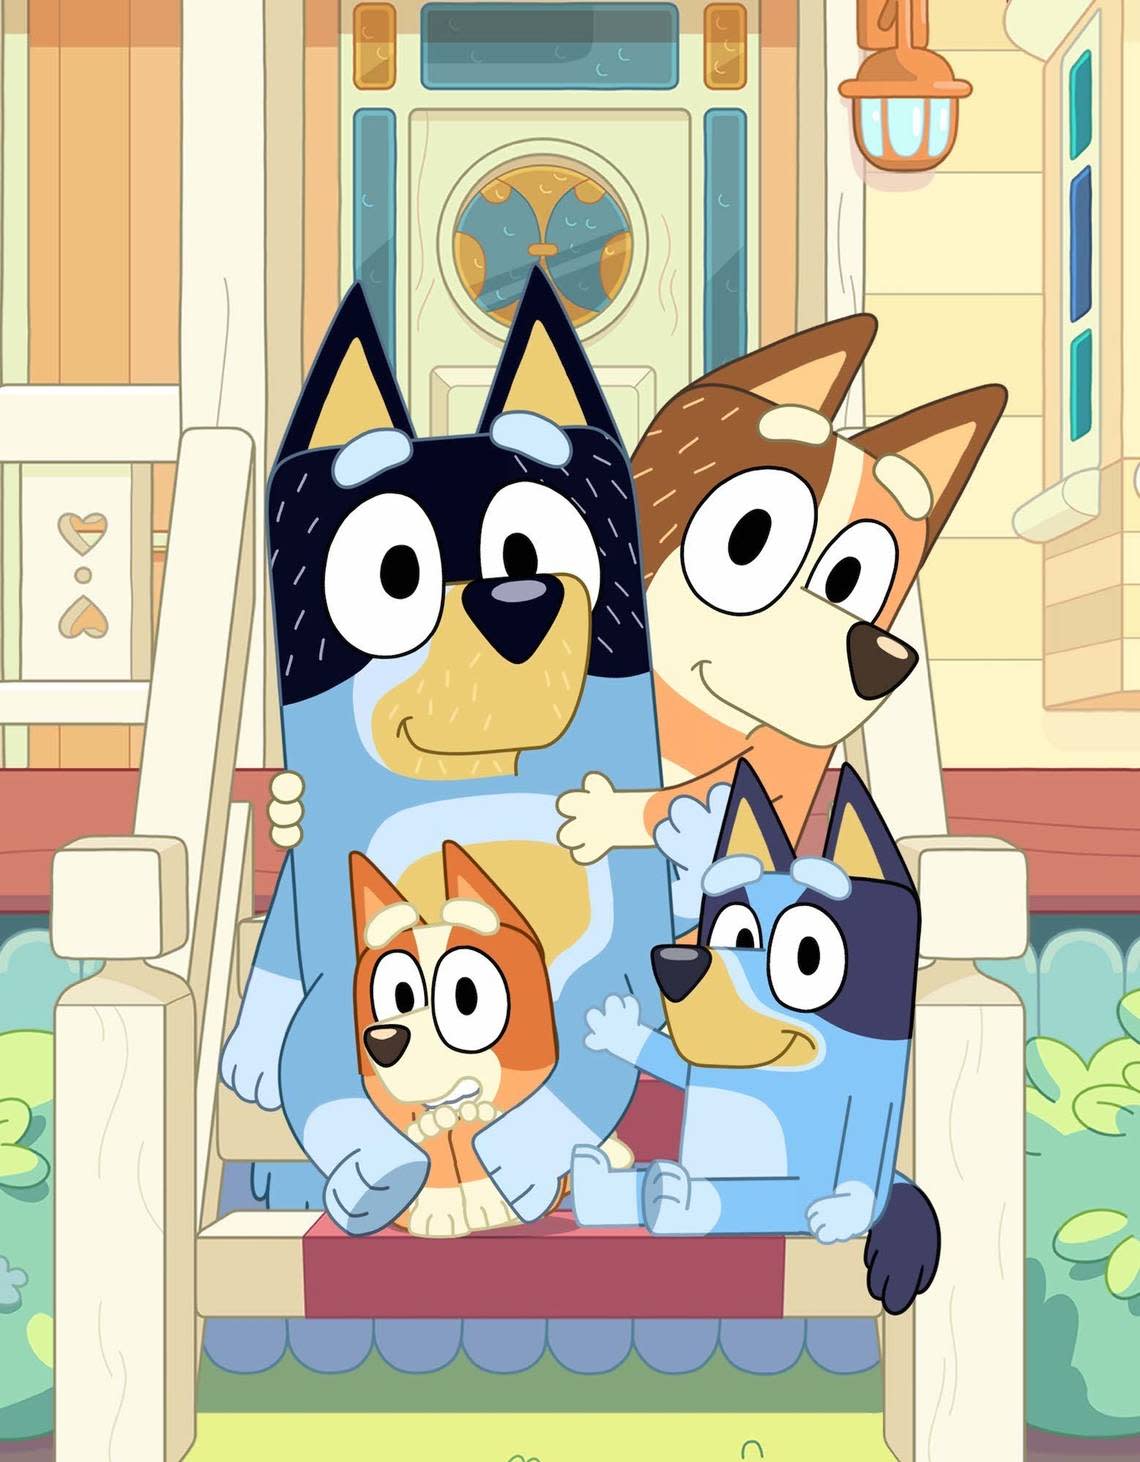 Clockwise from top, Dad (BANDIT), Mum (CHILLI), Bluey and Bingo (BLUEY’S SISTER). The voice actors for Bluey’s dad and mom will be at Lexington ComicCon this weekend.